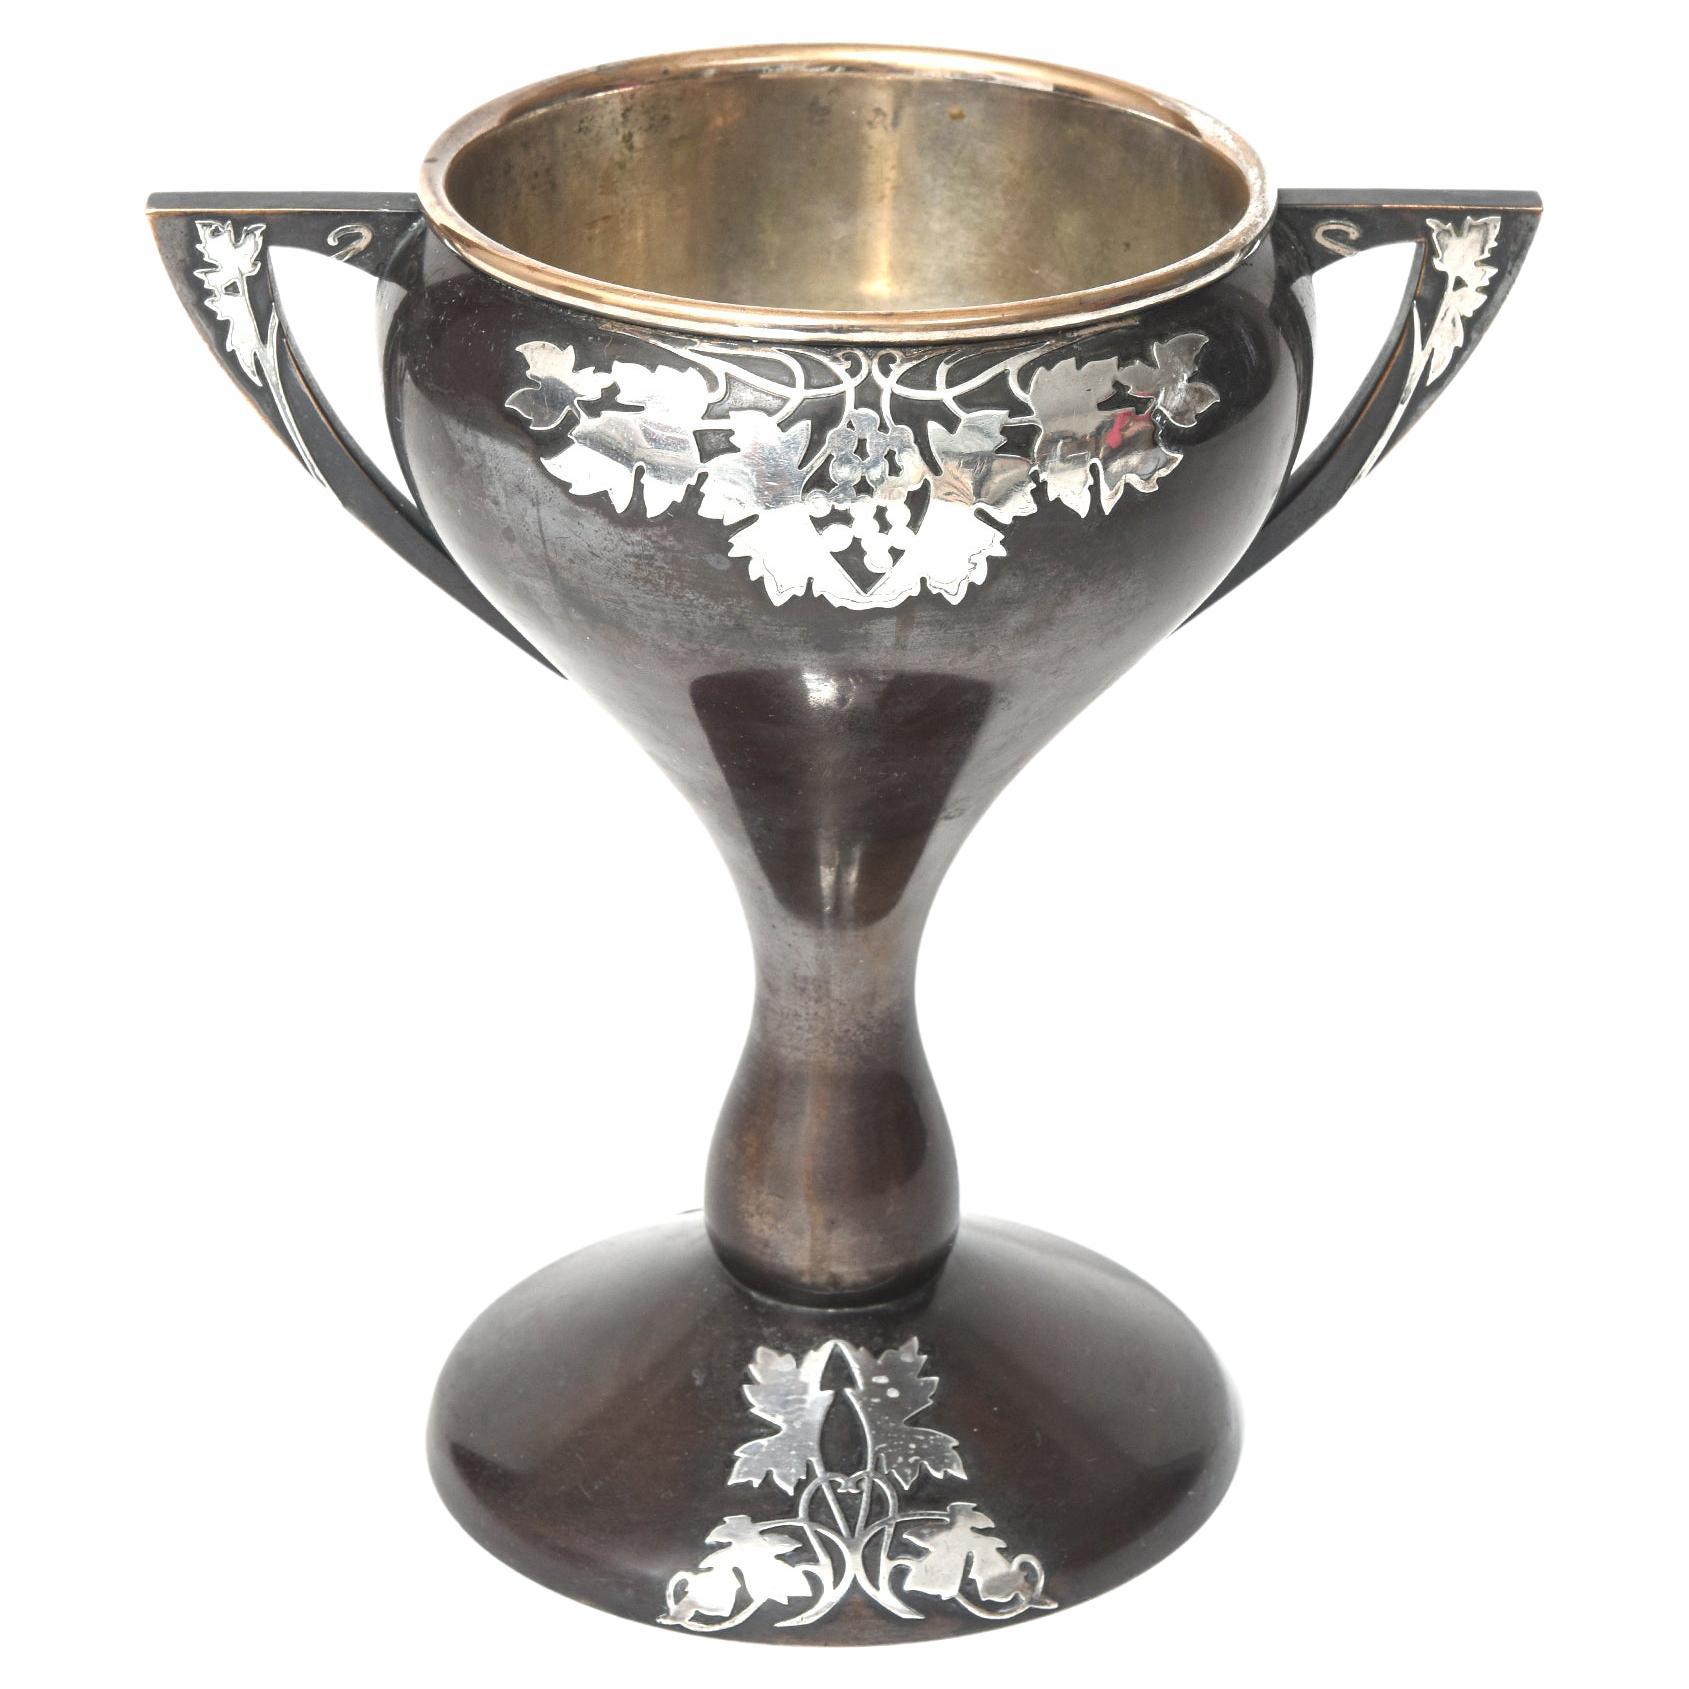 Heintz Arts & Crafts Sterling Overlay on Bronze Mixed Metals Trophy Loving Cup For Sale